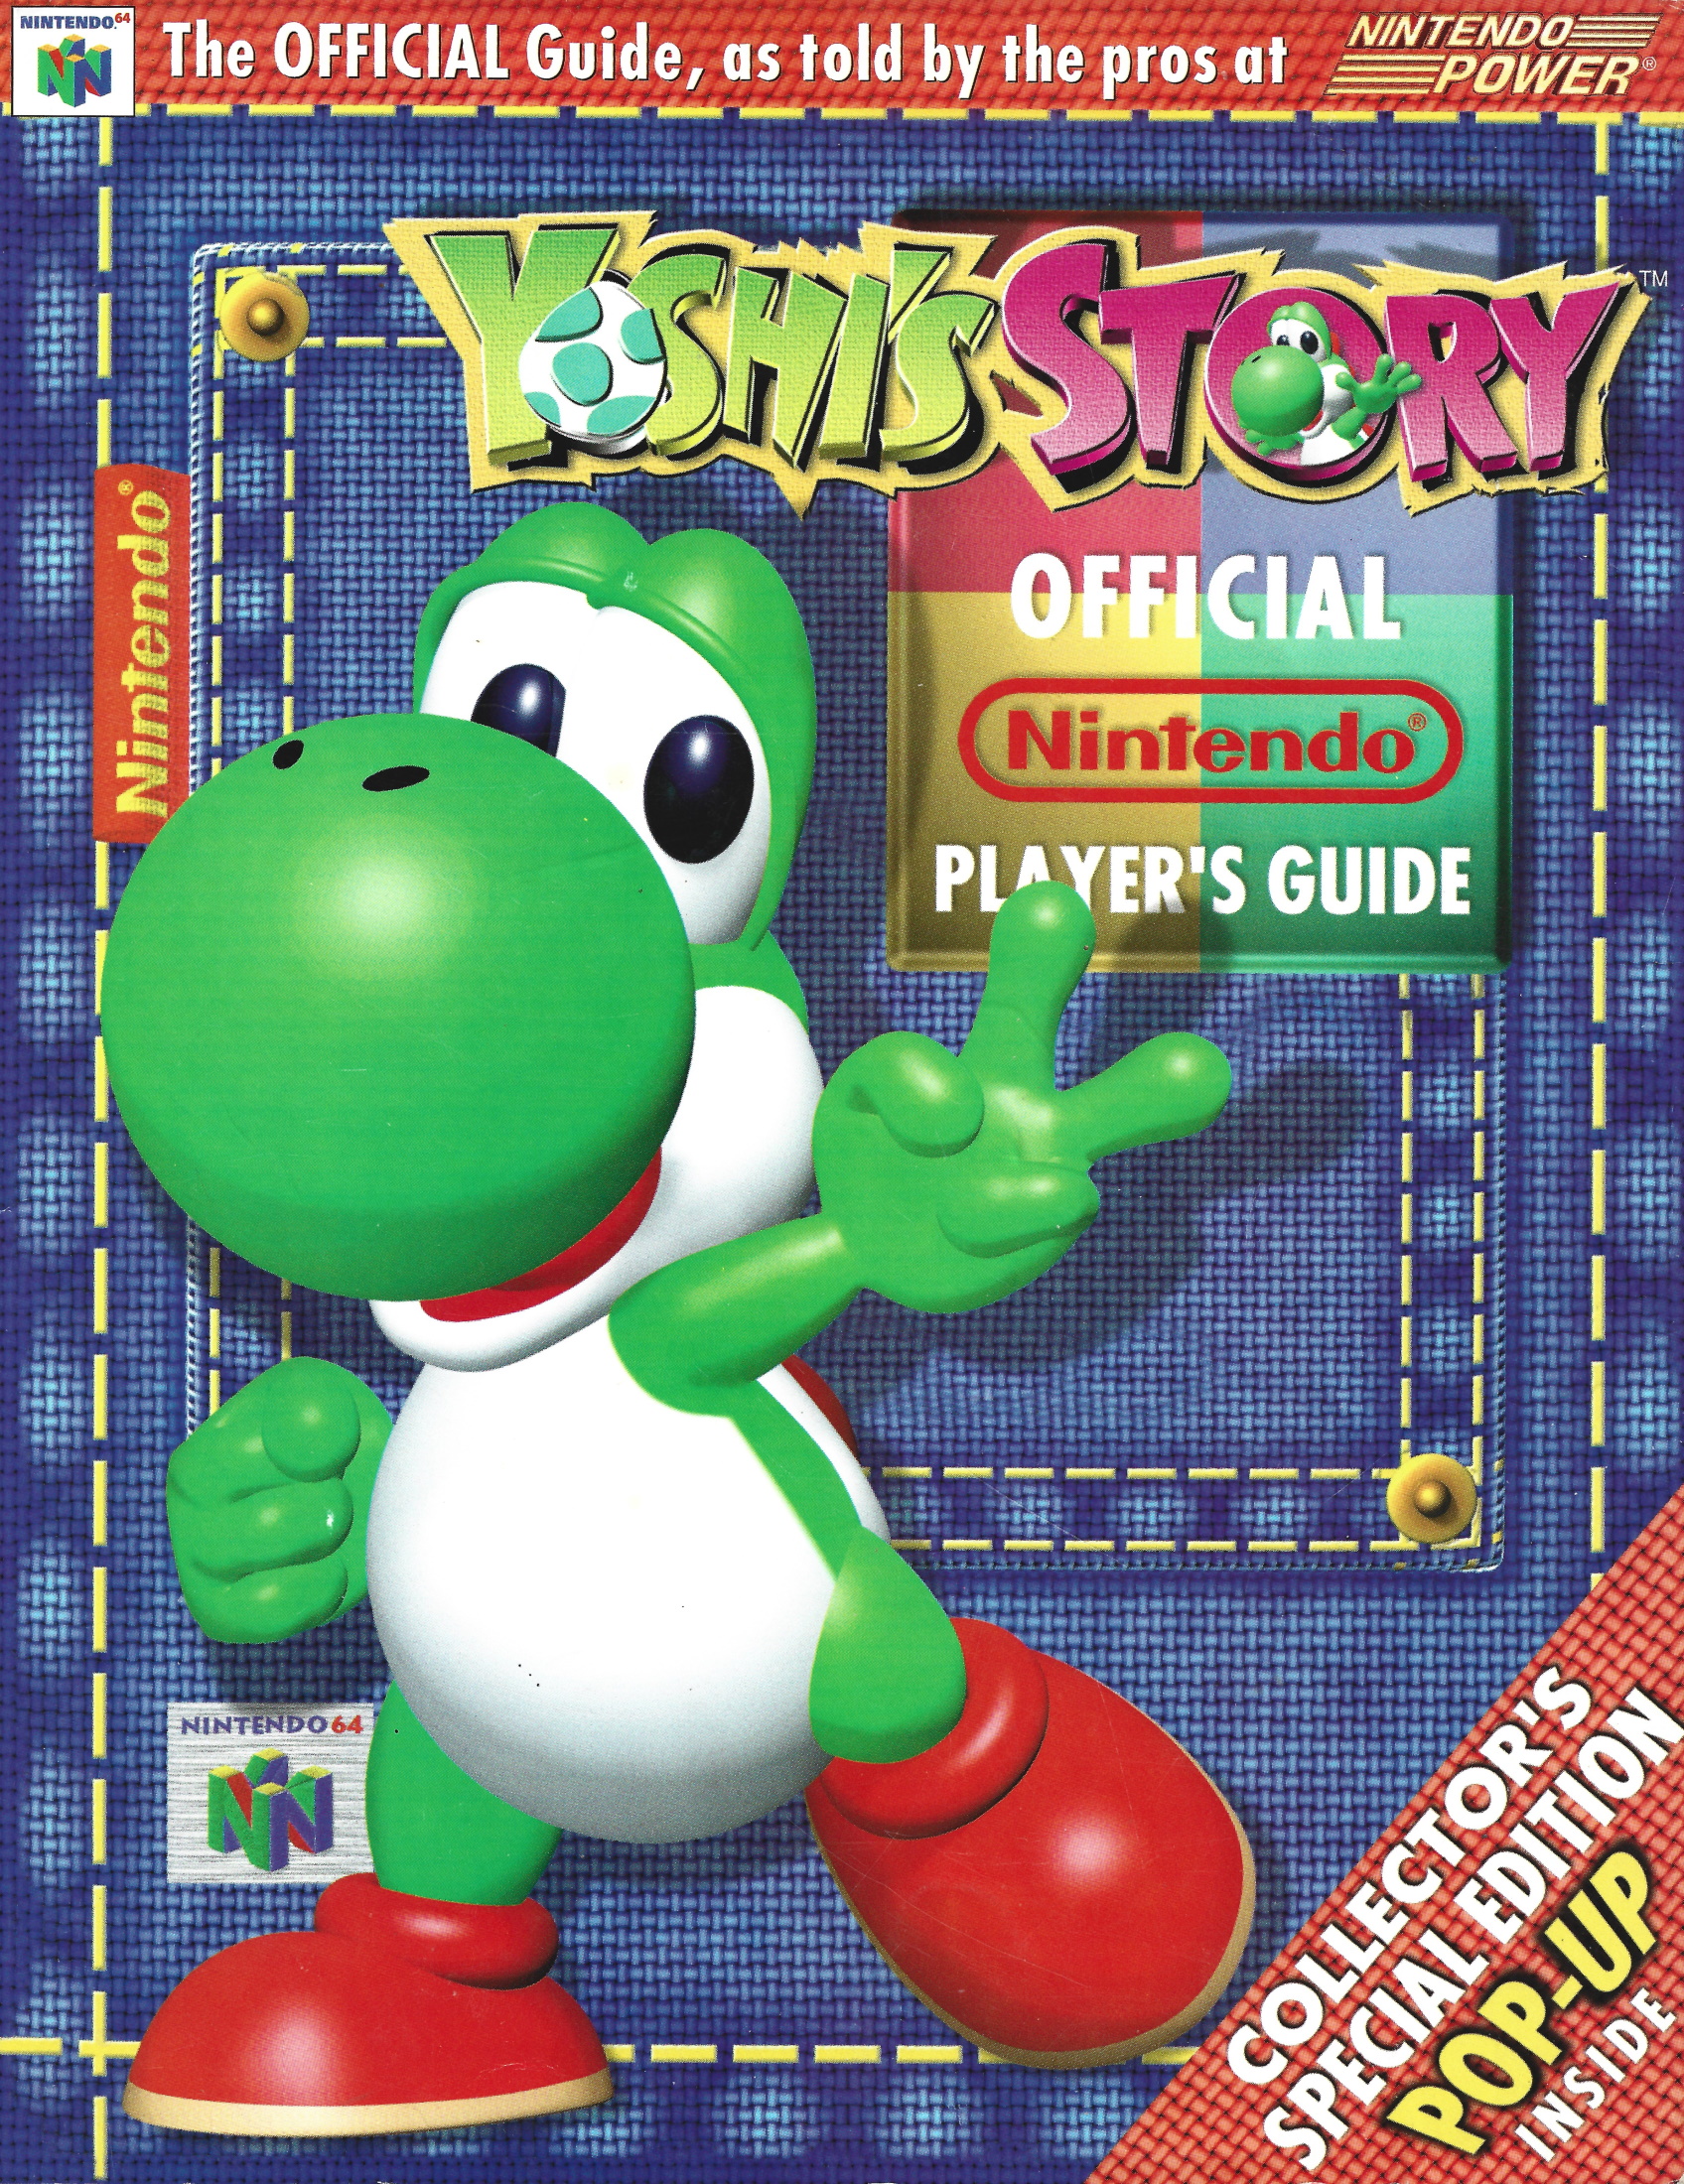 Yoshi's Story Official Nintendo Player's Guide